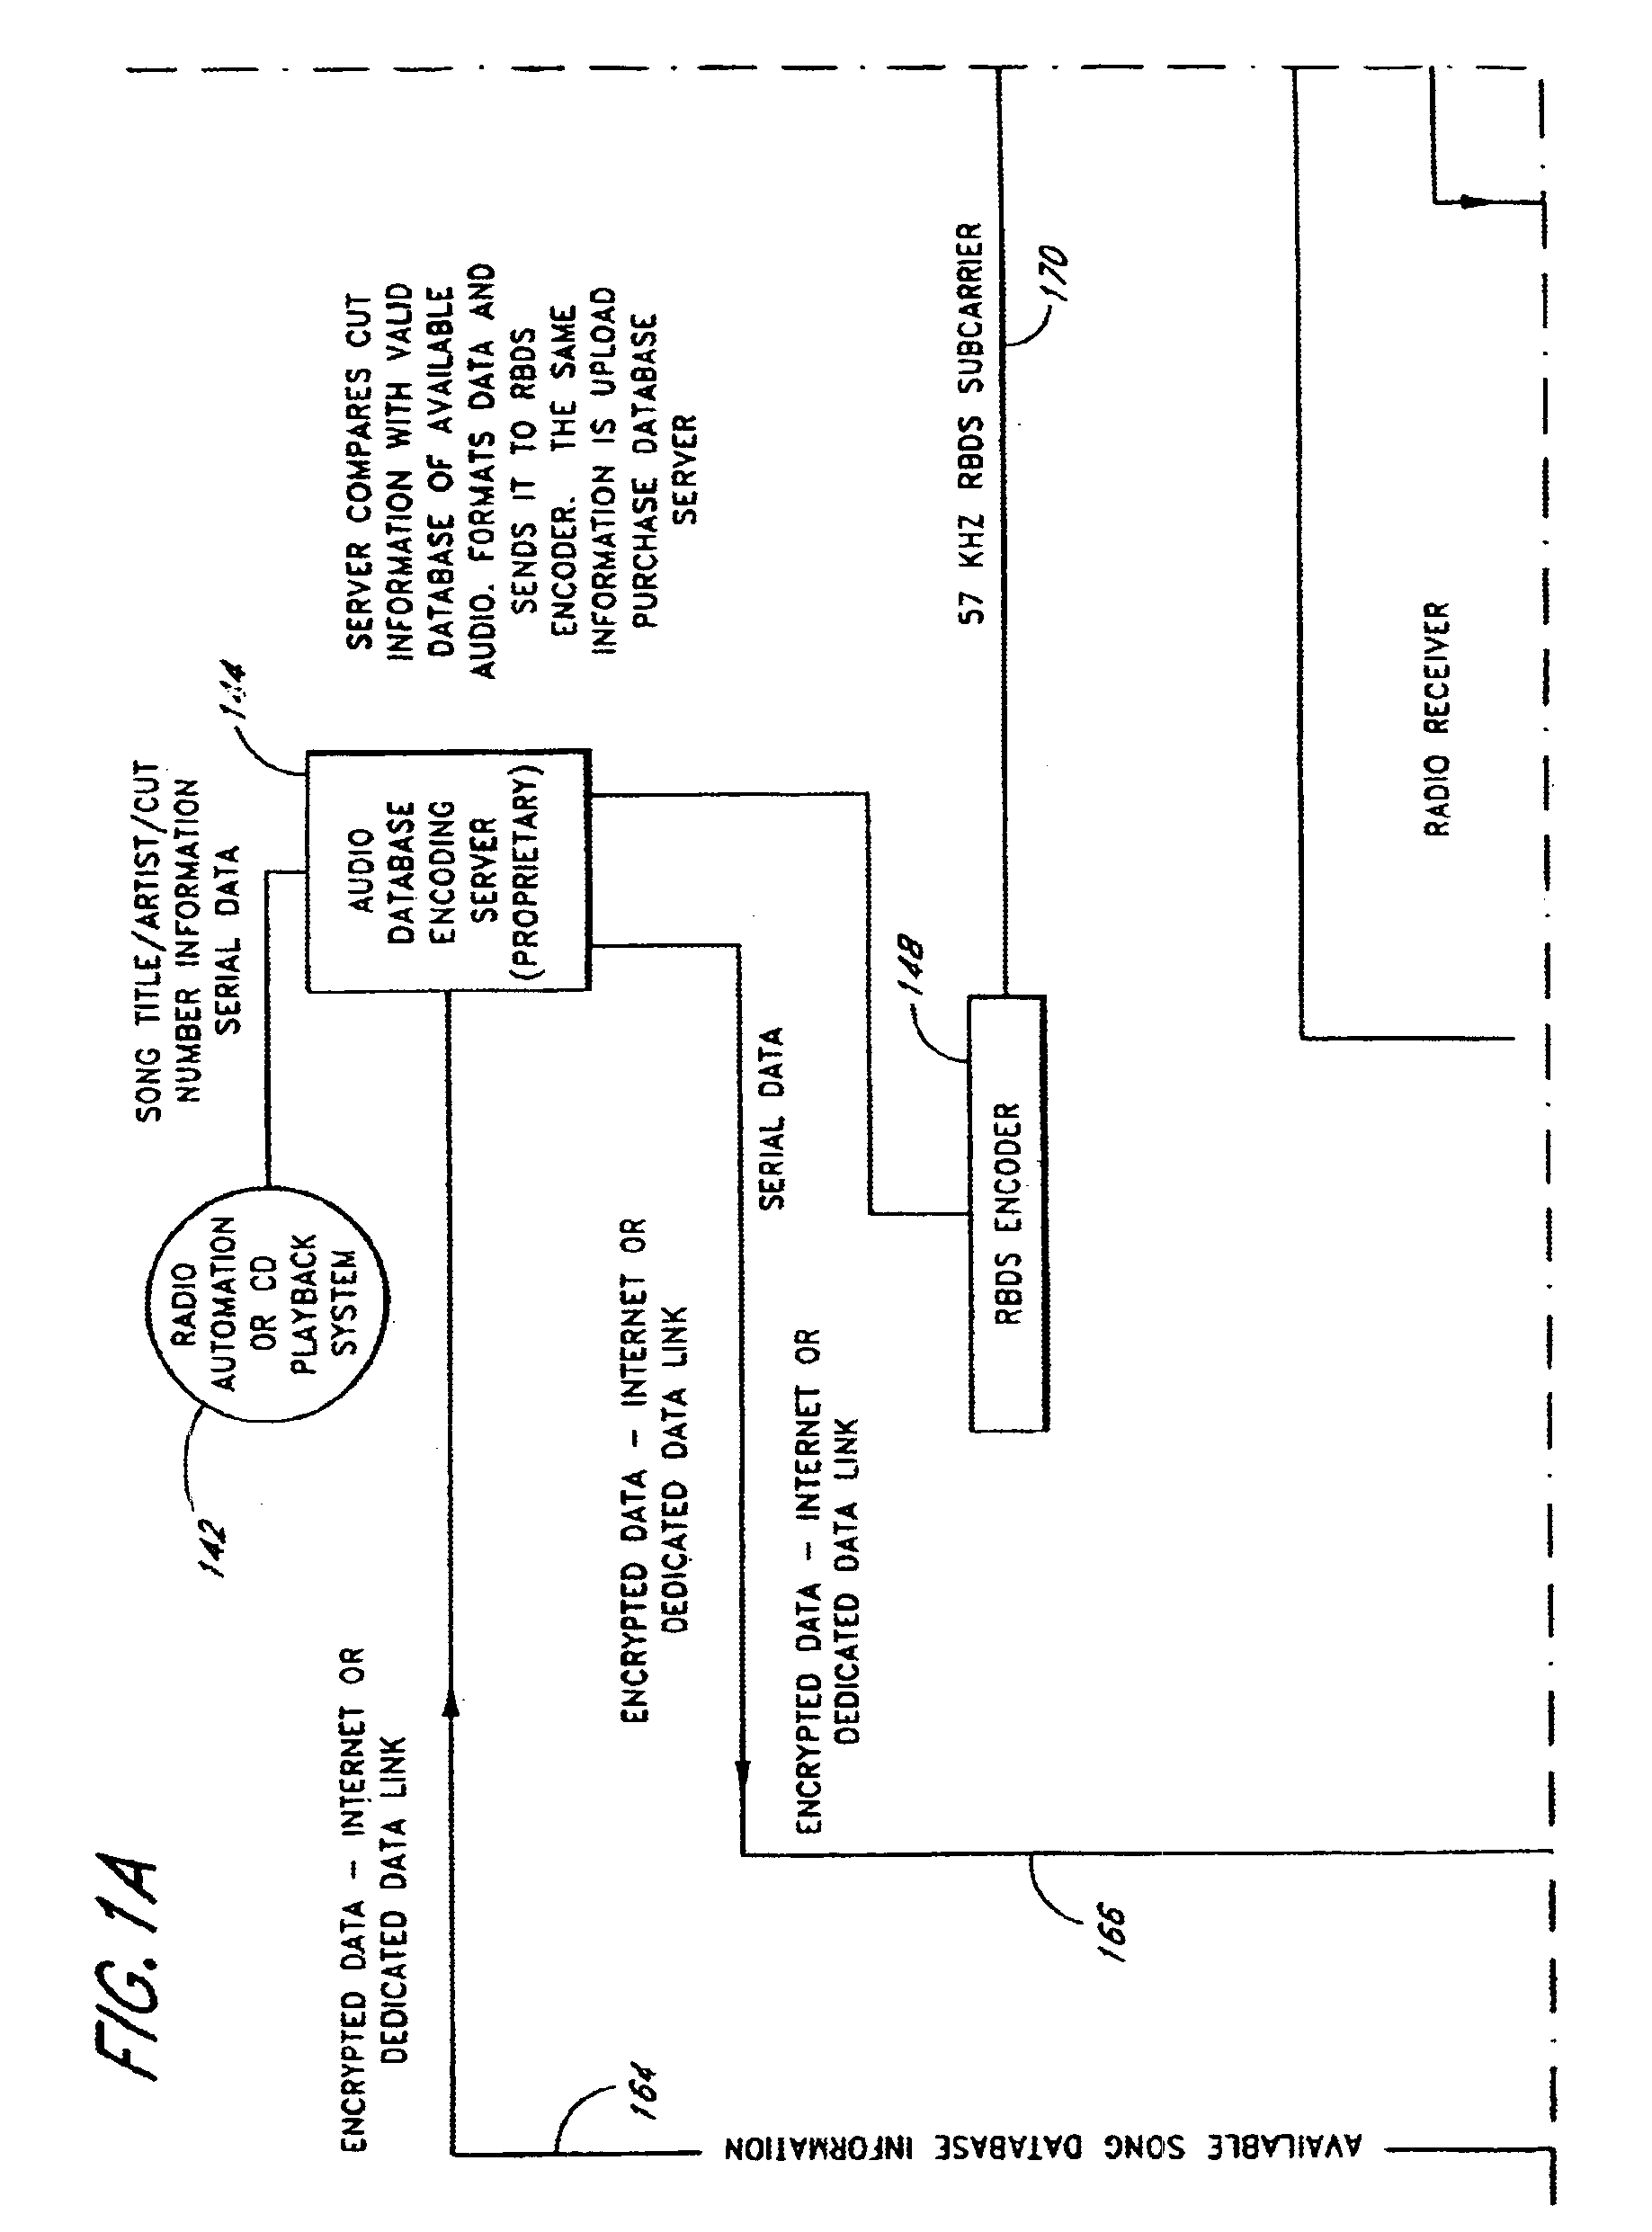 System and method for ordering and delivering media content